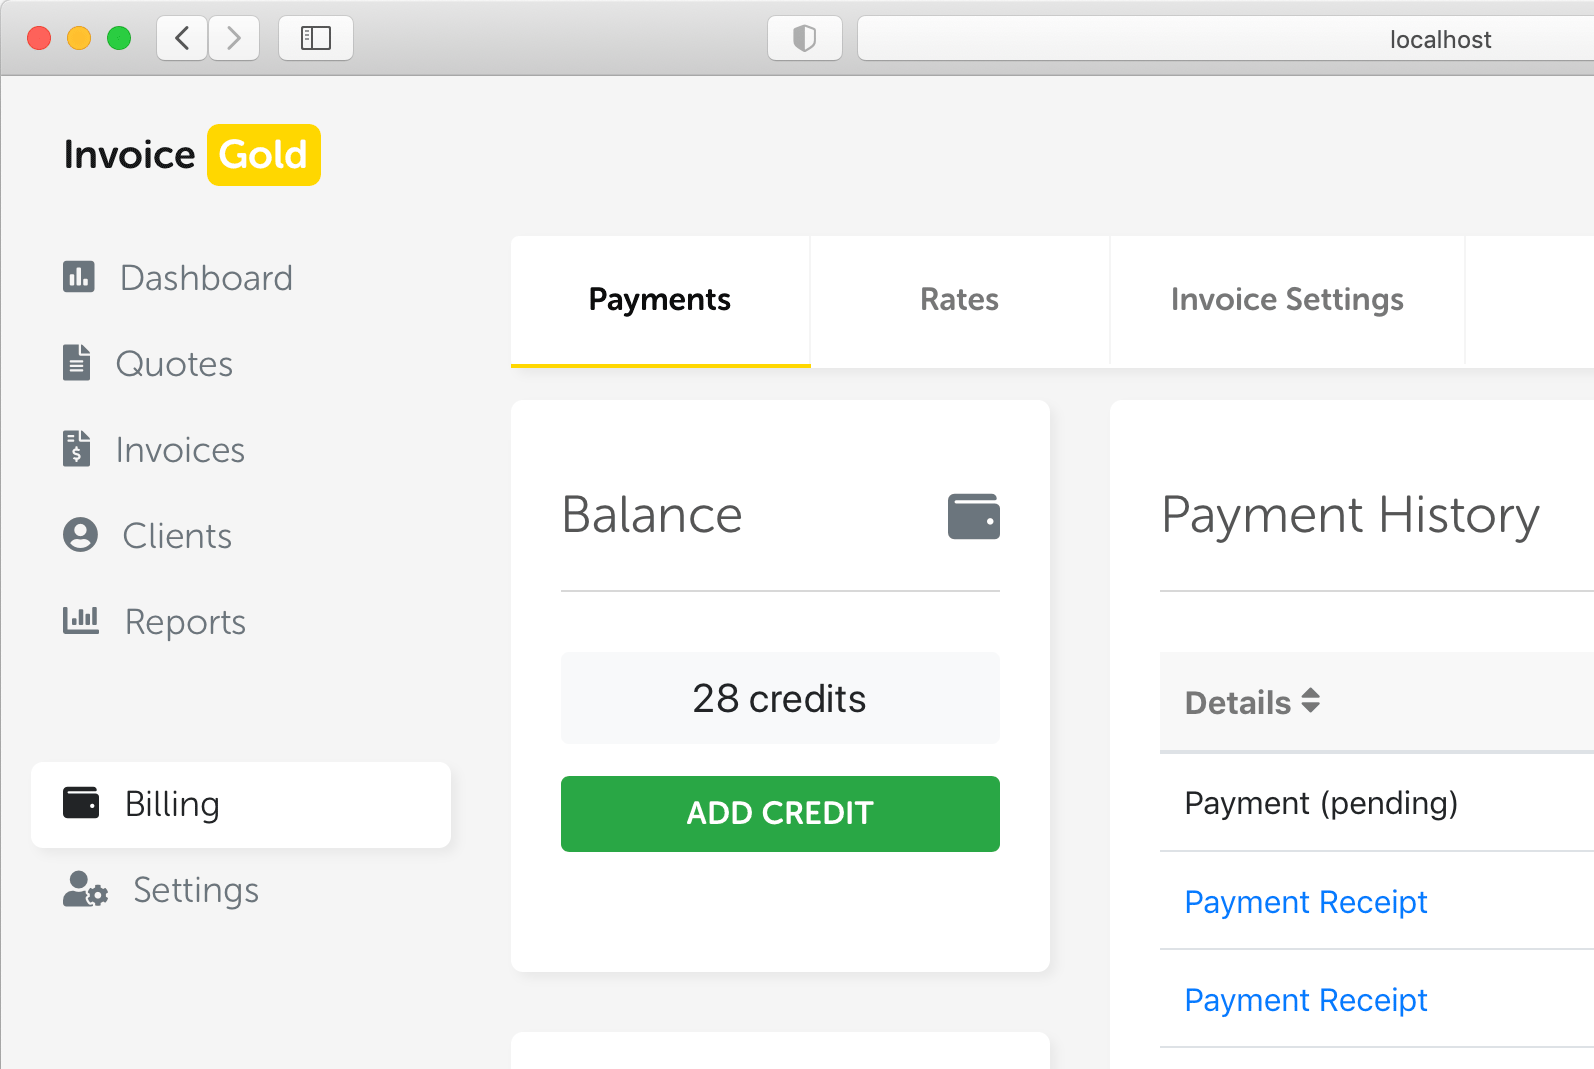 Pay as you go invoicing app